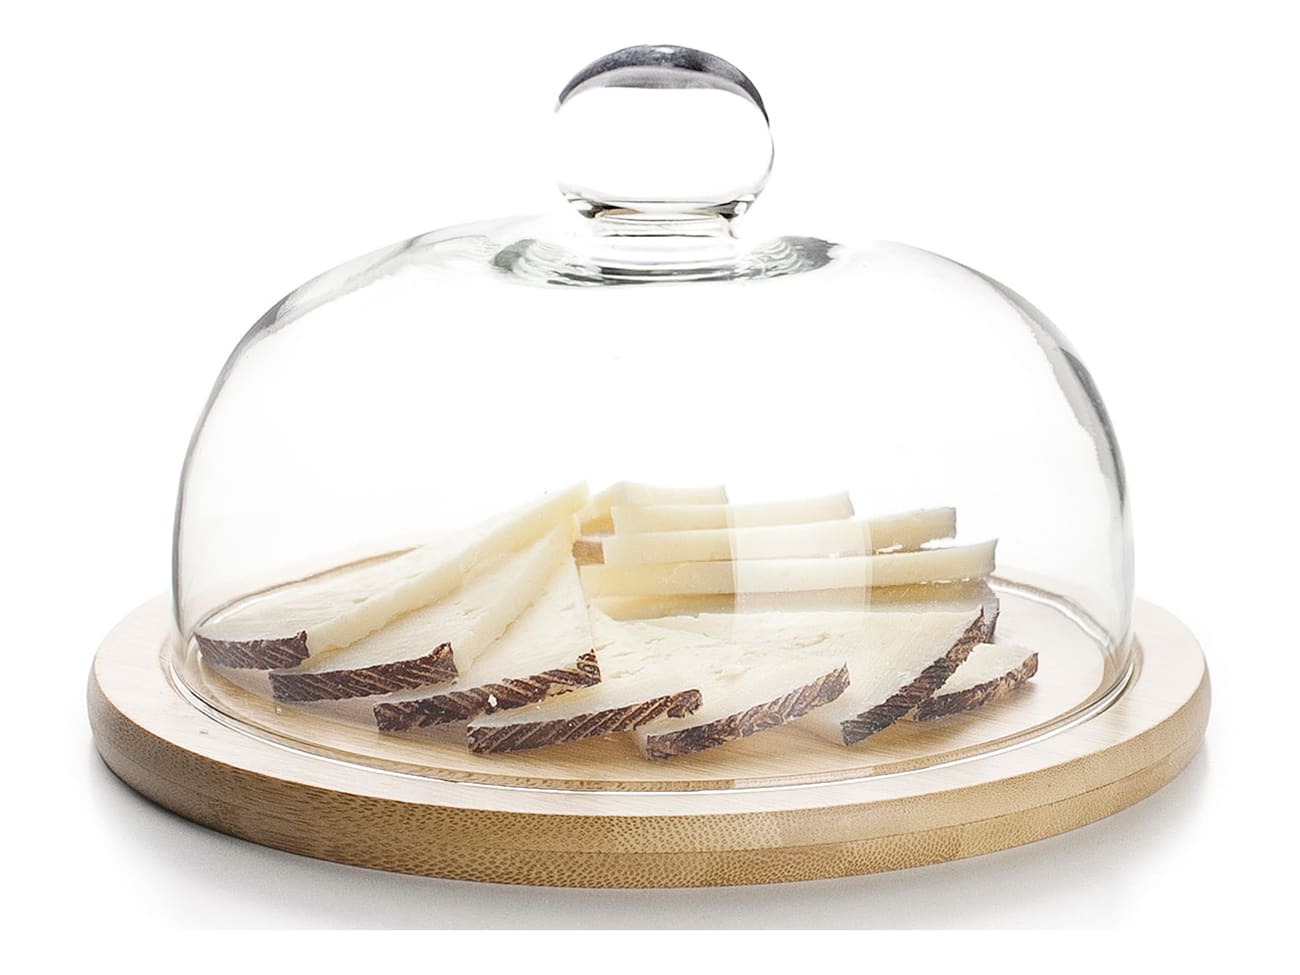 Tray for cheese - with glass bell - Ø 20 cm - Ibili - Meilleur du Chef